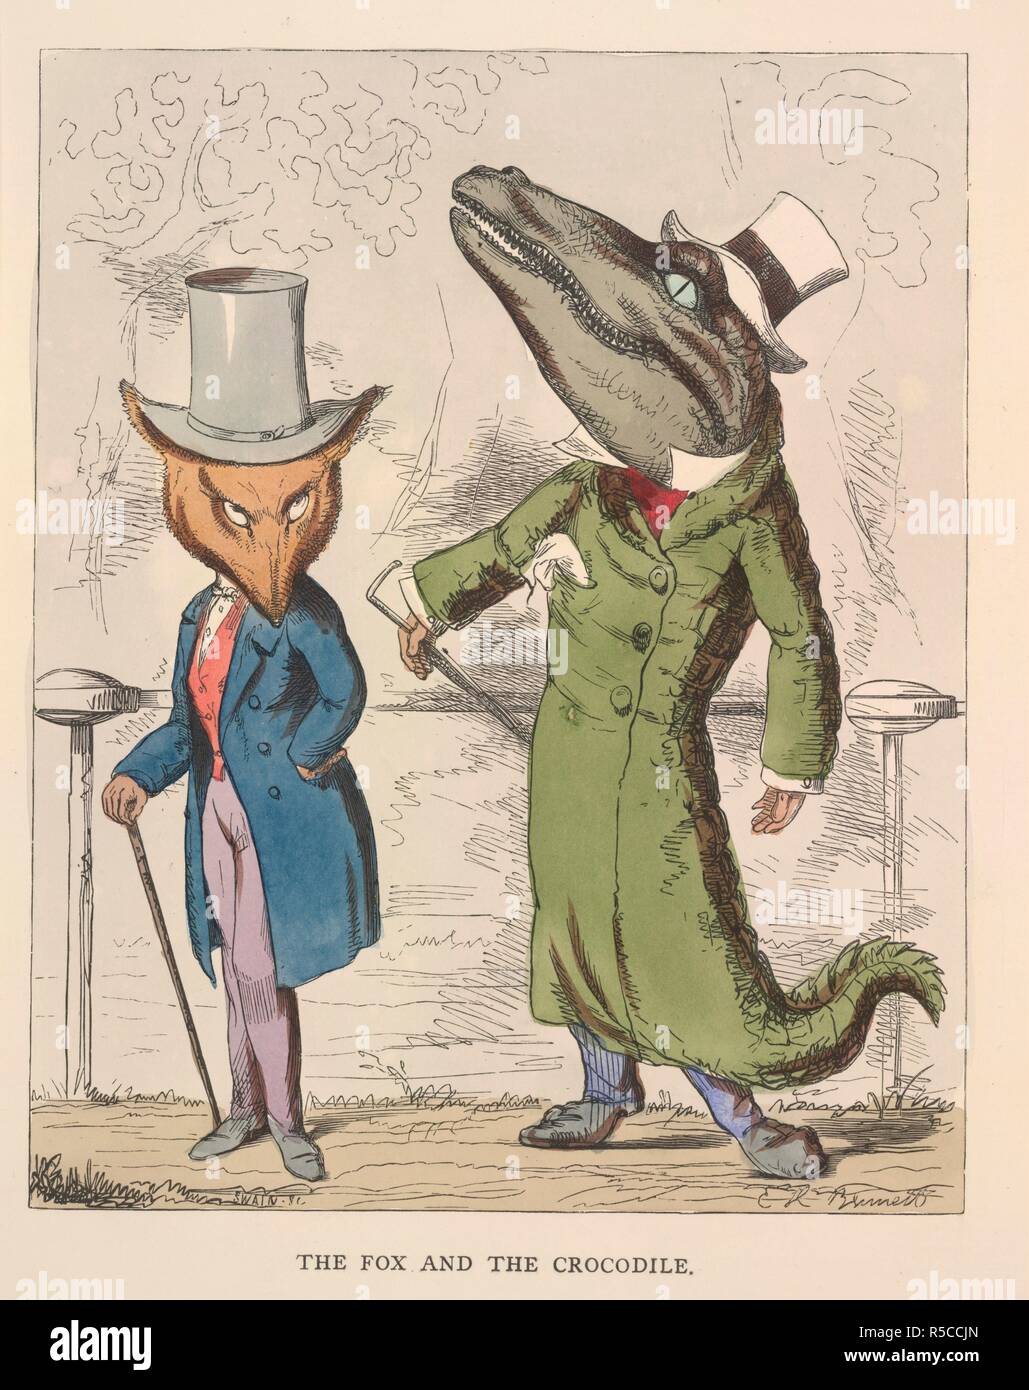 The fox and the crocodile. The Fables of Ã†sop and others. Translated into hum. W. Kent & Co.: London, 1857. The fox and the crocodile. Both dressed in top hats and long coats.  Image taken from The Fables of Ã†sop and others. Translated into human nature, designed and drawn on the wood by Charles H. Bennett, etc.  Originally published/produced in W. Kent & Co.: London, 1857. . Source: 12305.g.11, opposite 19. Language: English. Author: AESOP. Bennett, C. H. Swain, J. Stock Photo